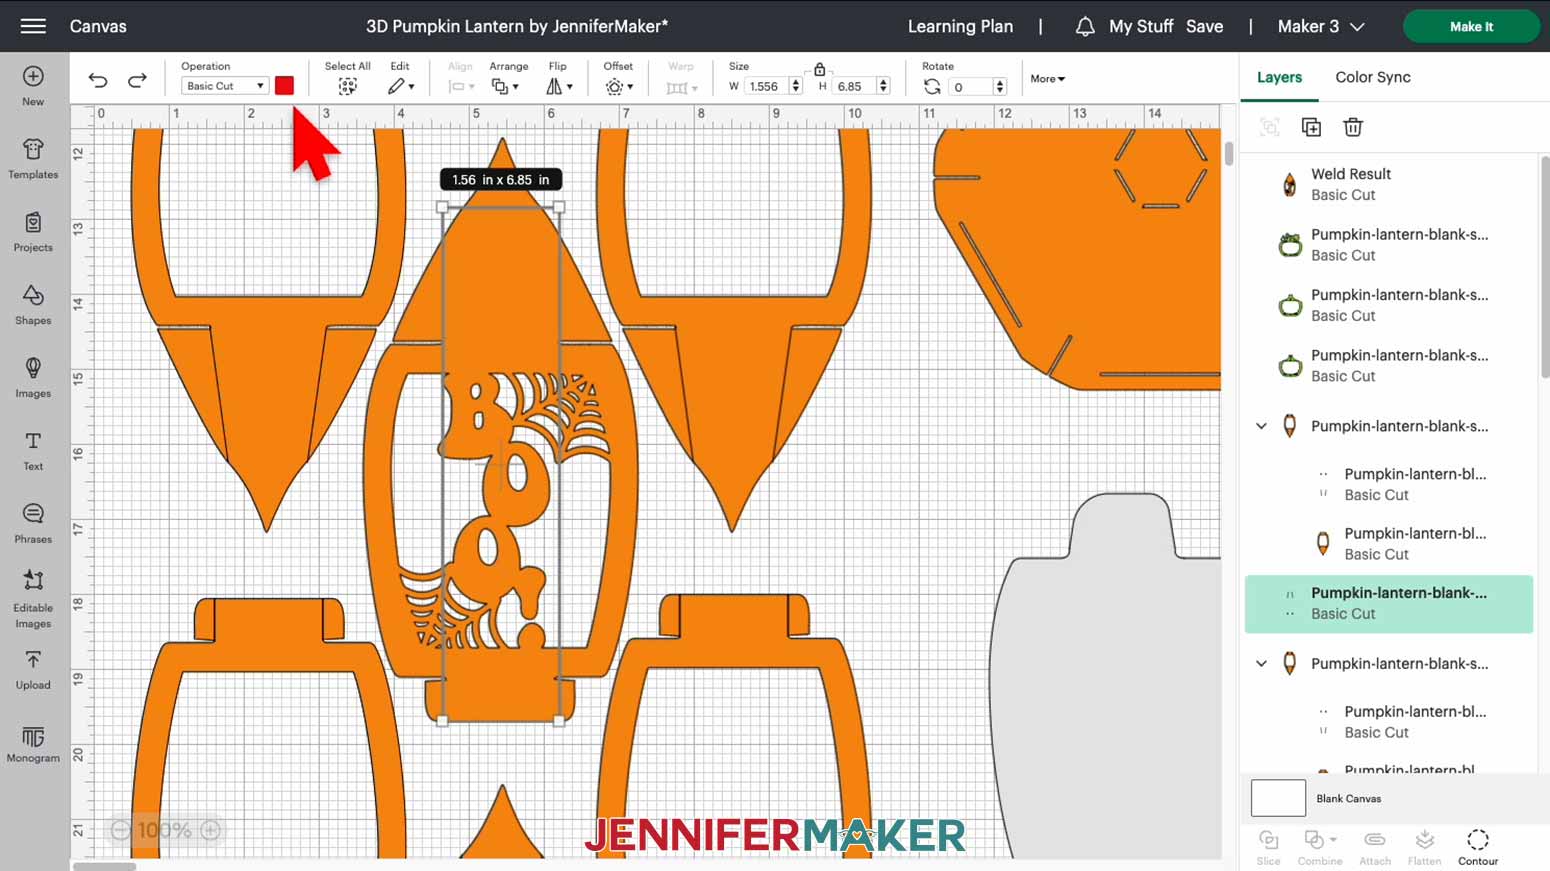 In Cricut Design Space, select the score layer, which will have faint lines colored in red, for the 3D pumpkin lantern panel